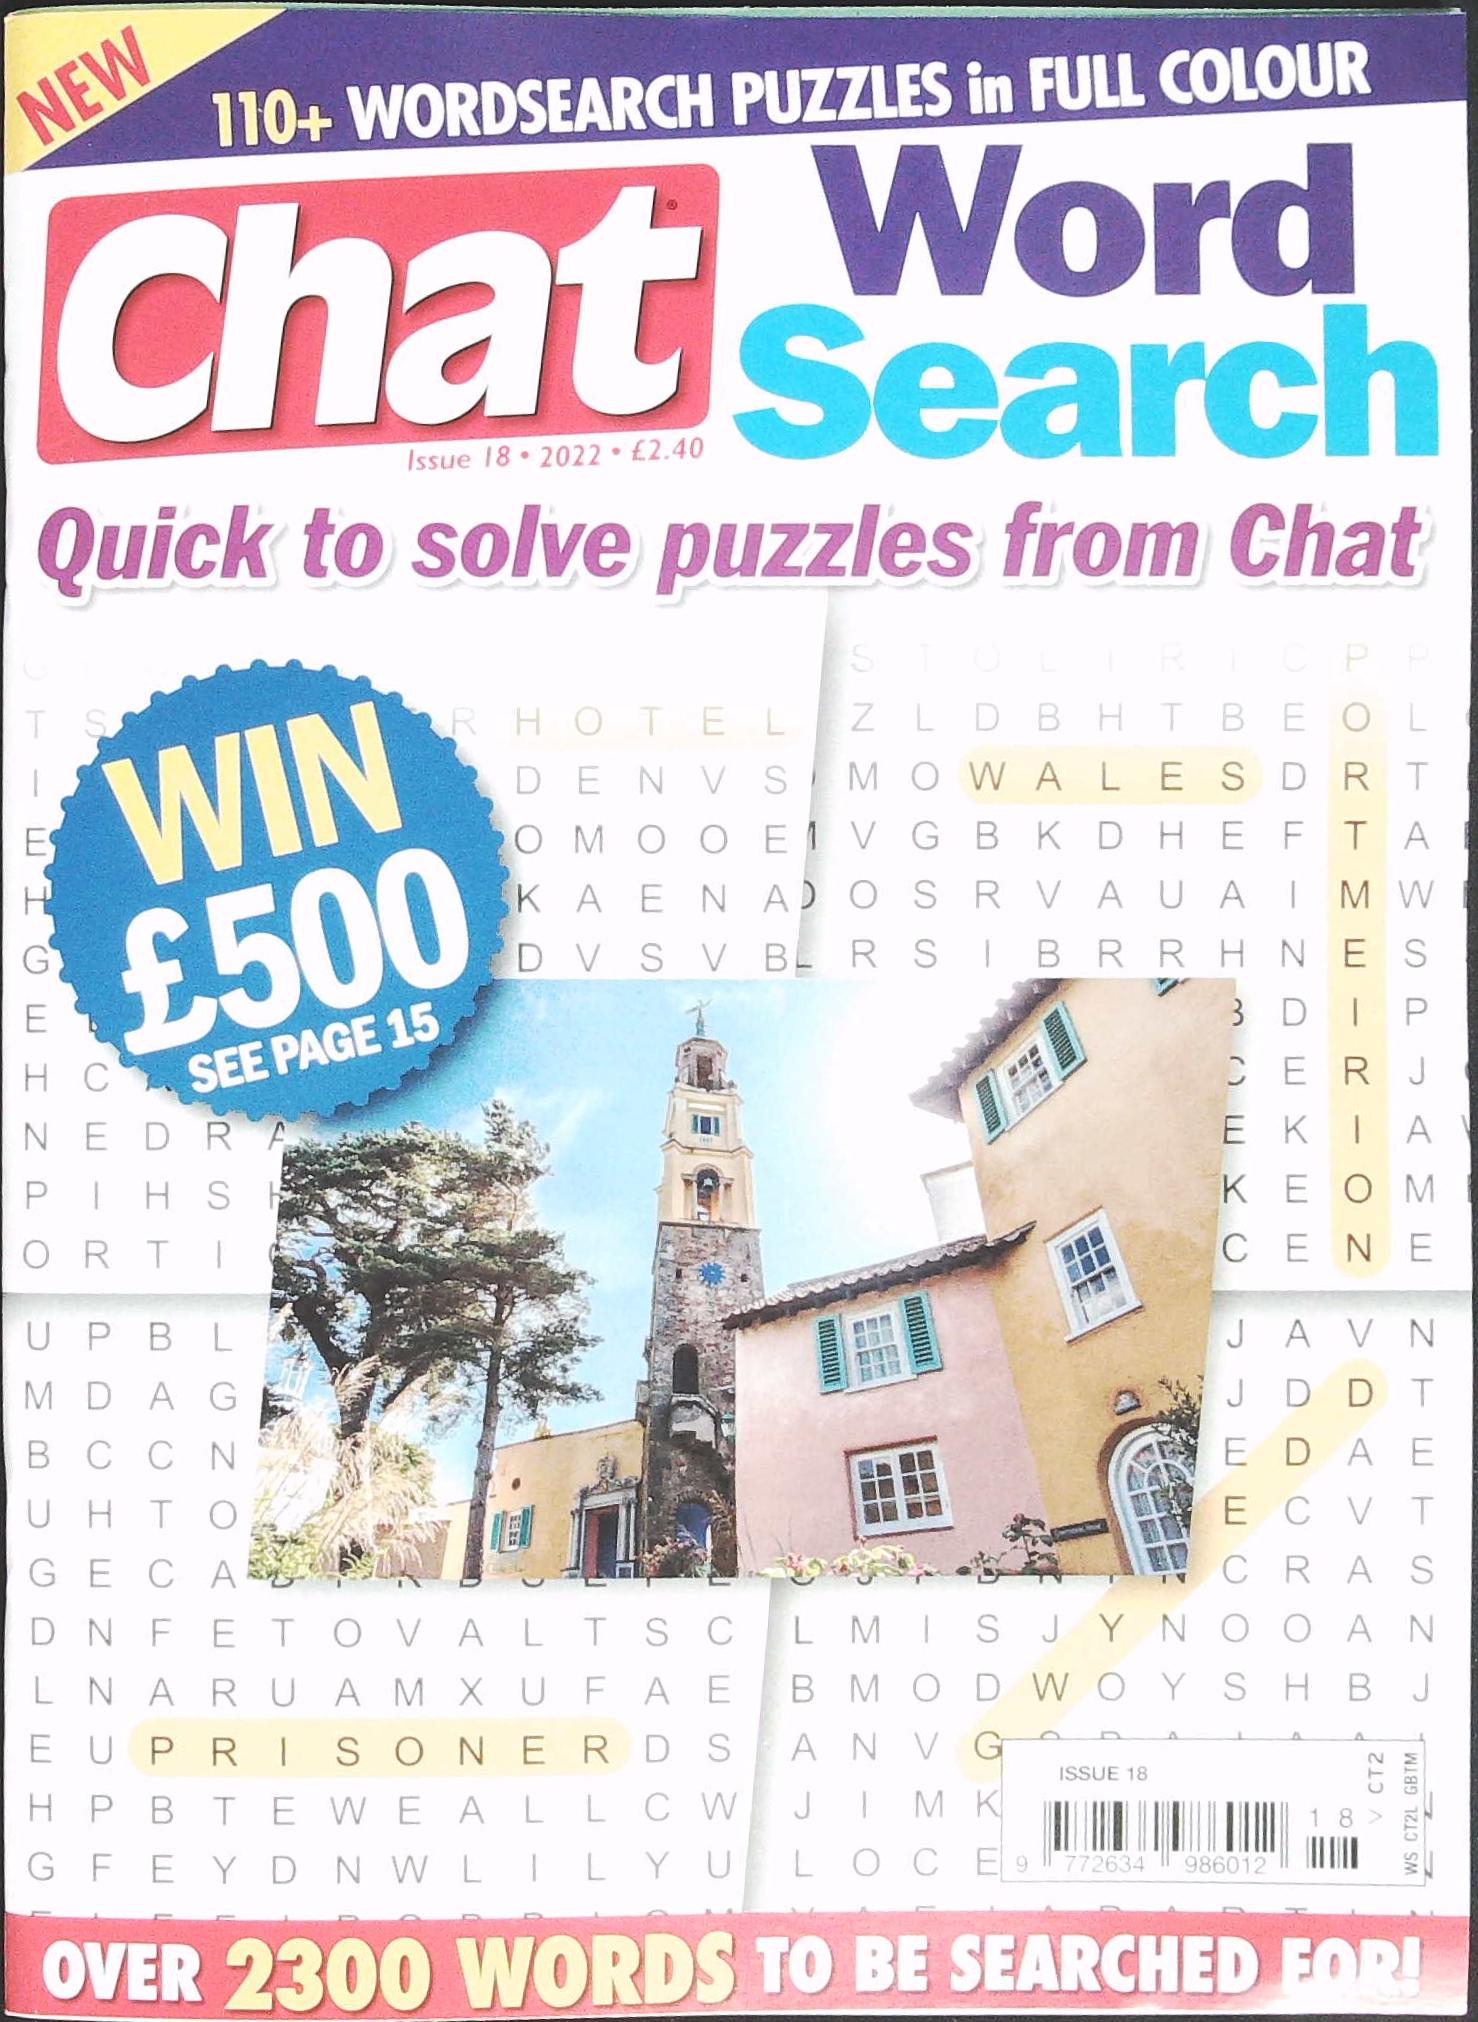 CHAT WORD SEARCH